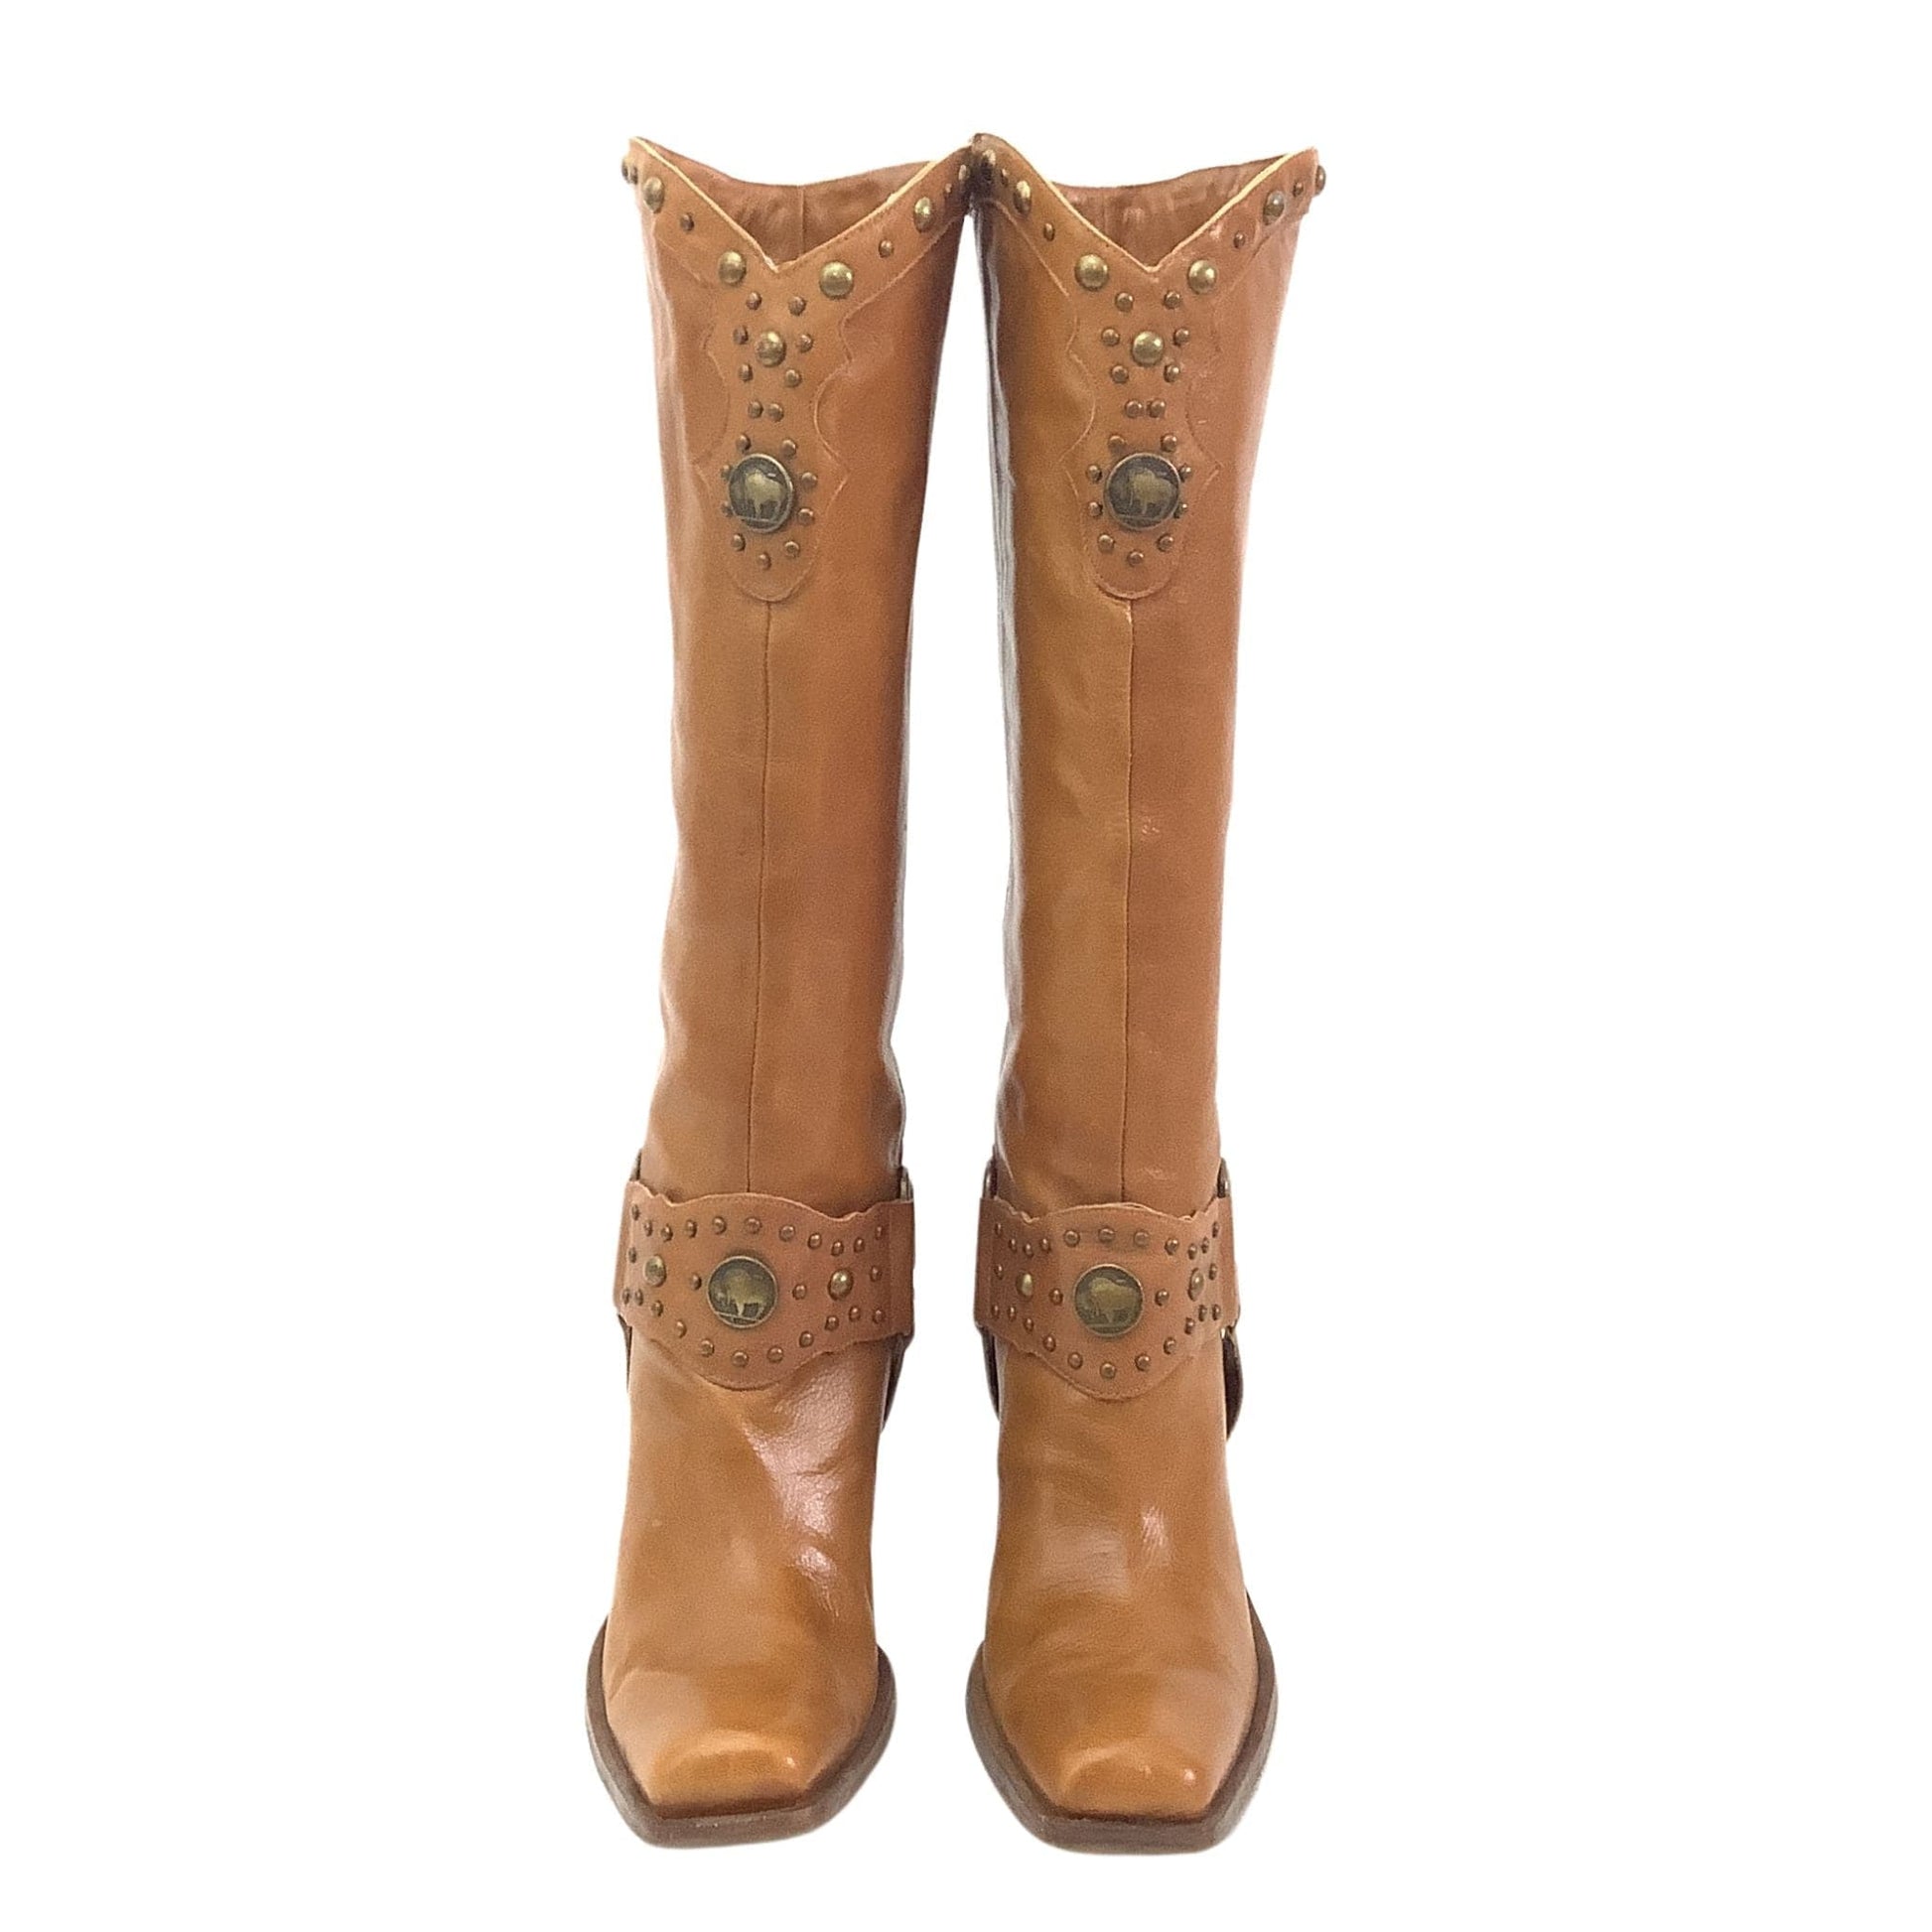 Studded Western Boots 7M / Tan / Y2K - Now